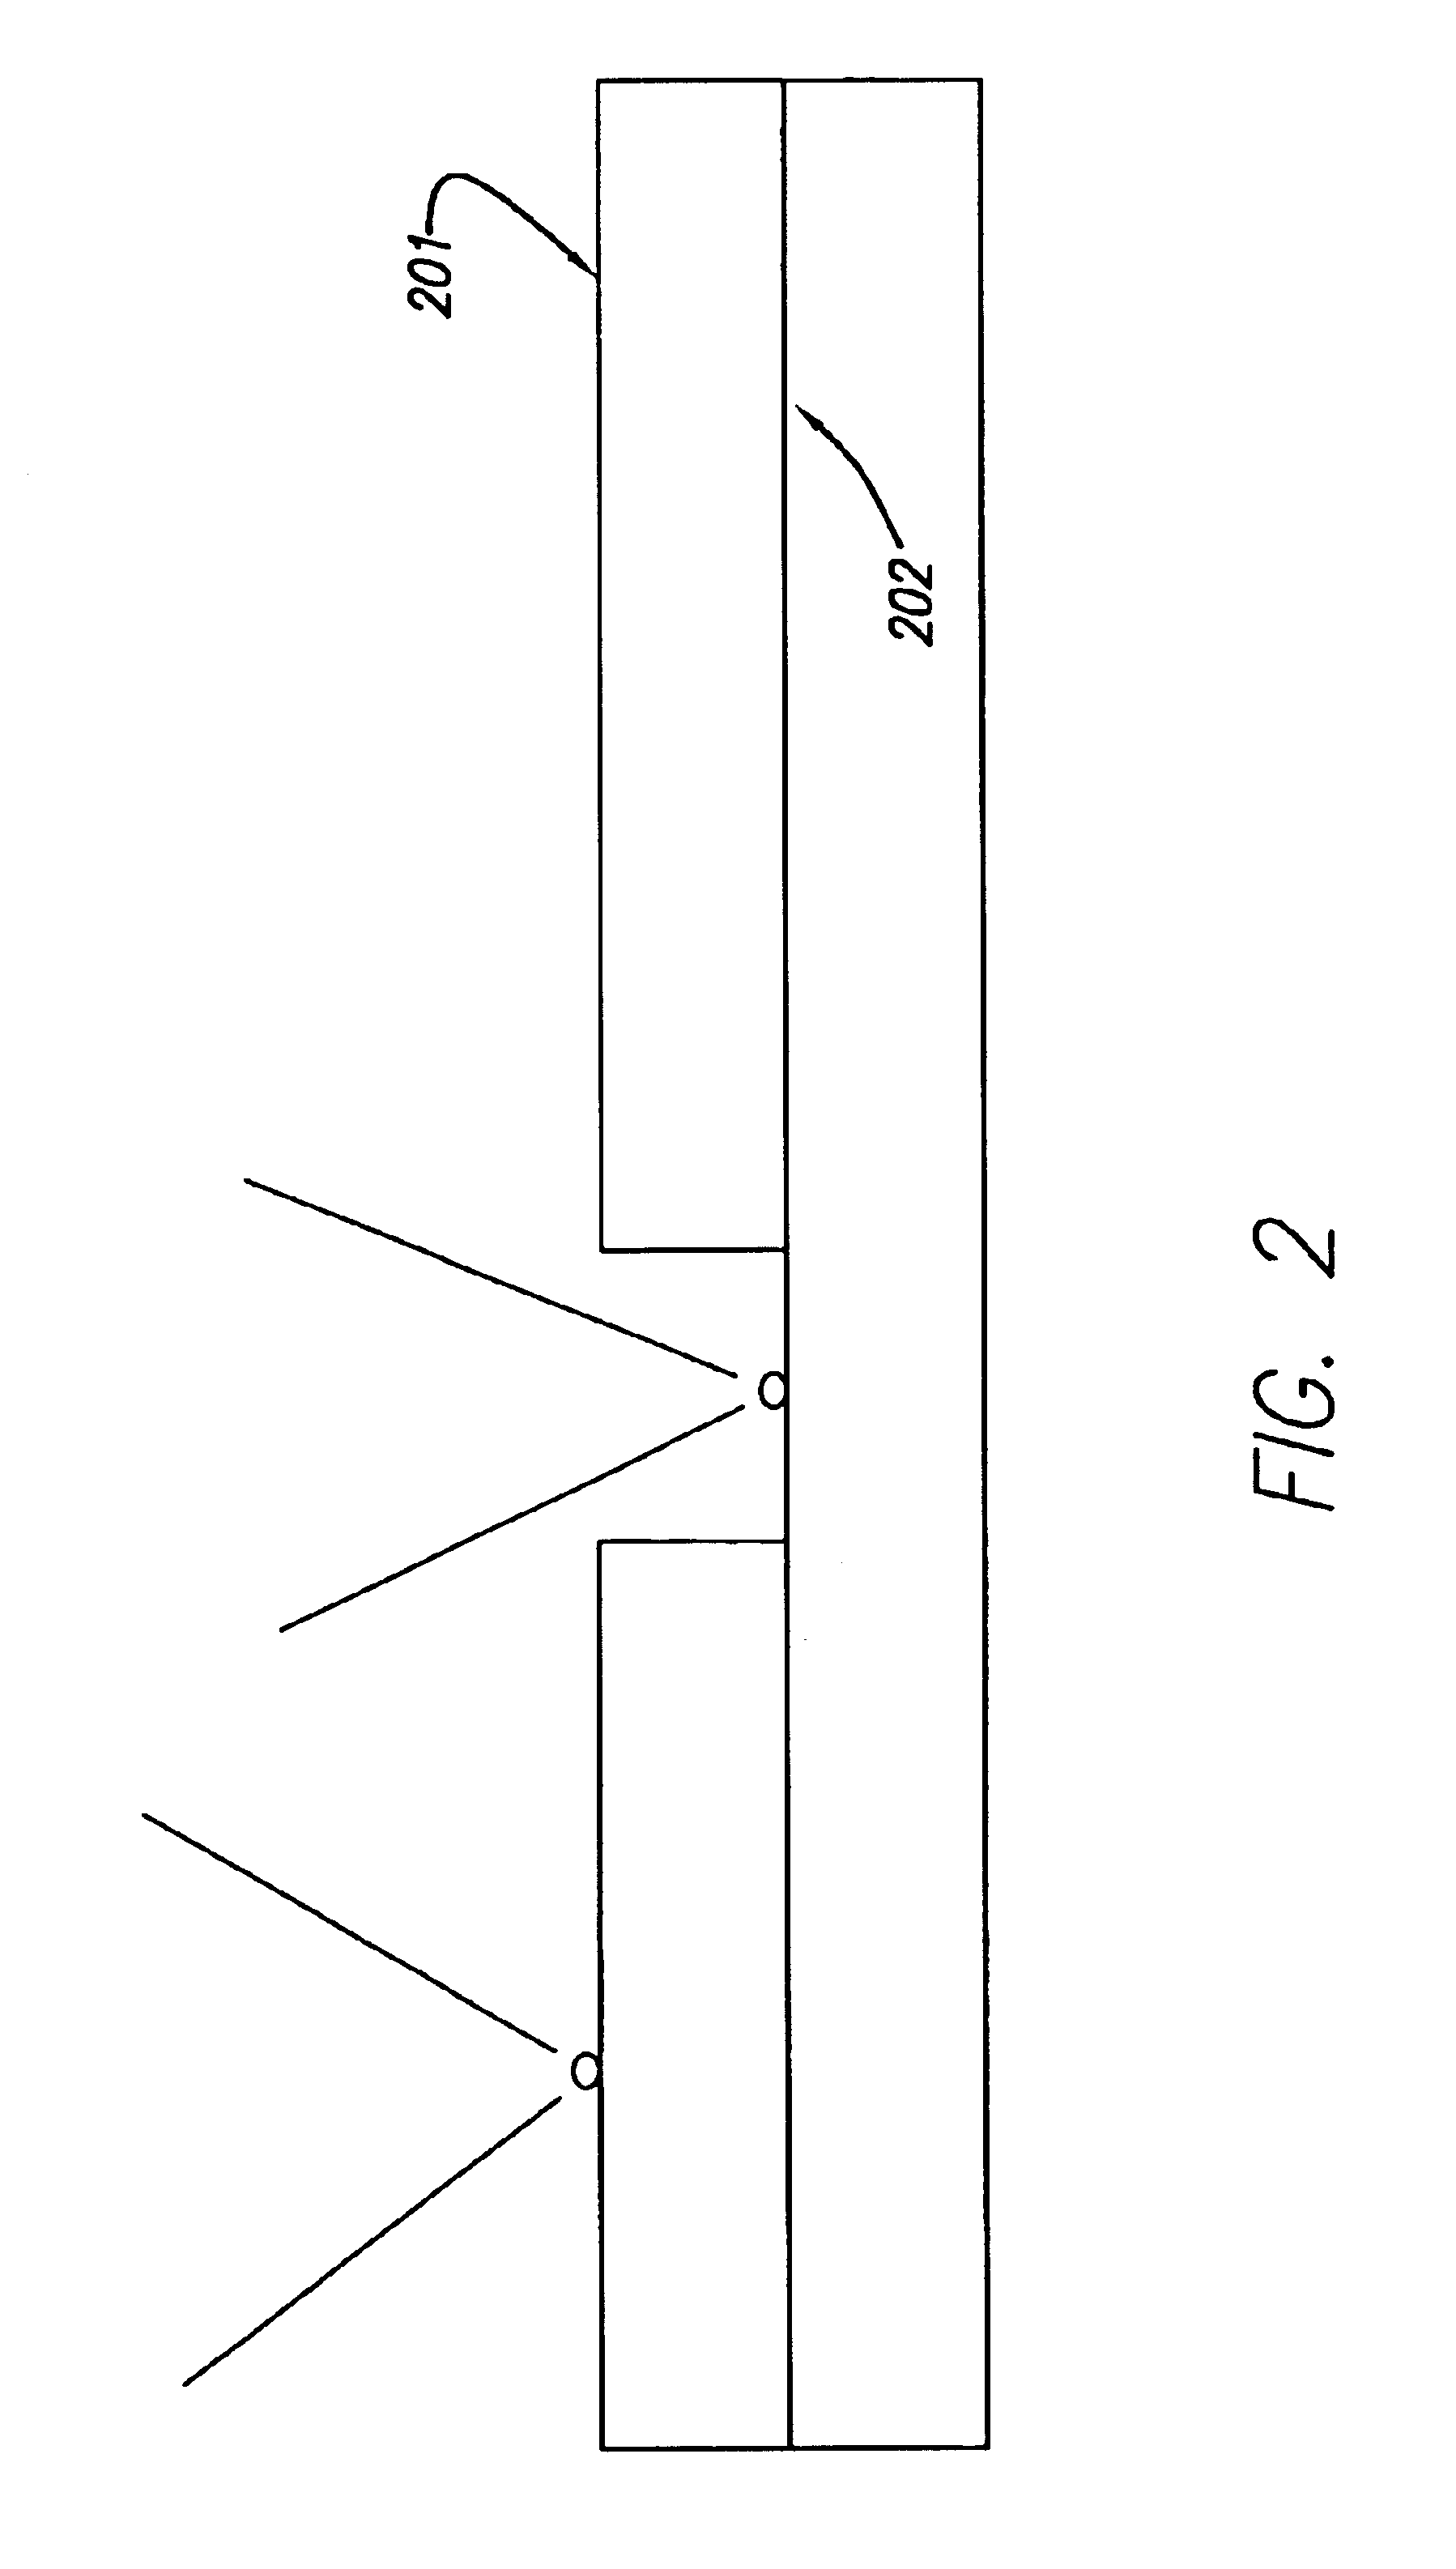 Confocal wafer inspection method and apparatus using fly lens arrangement